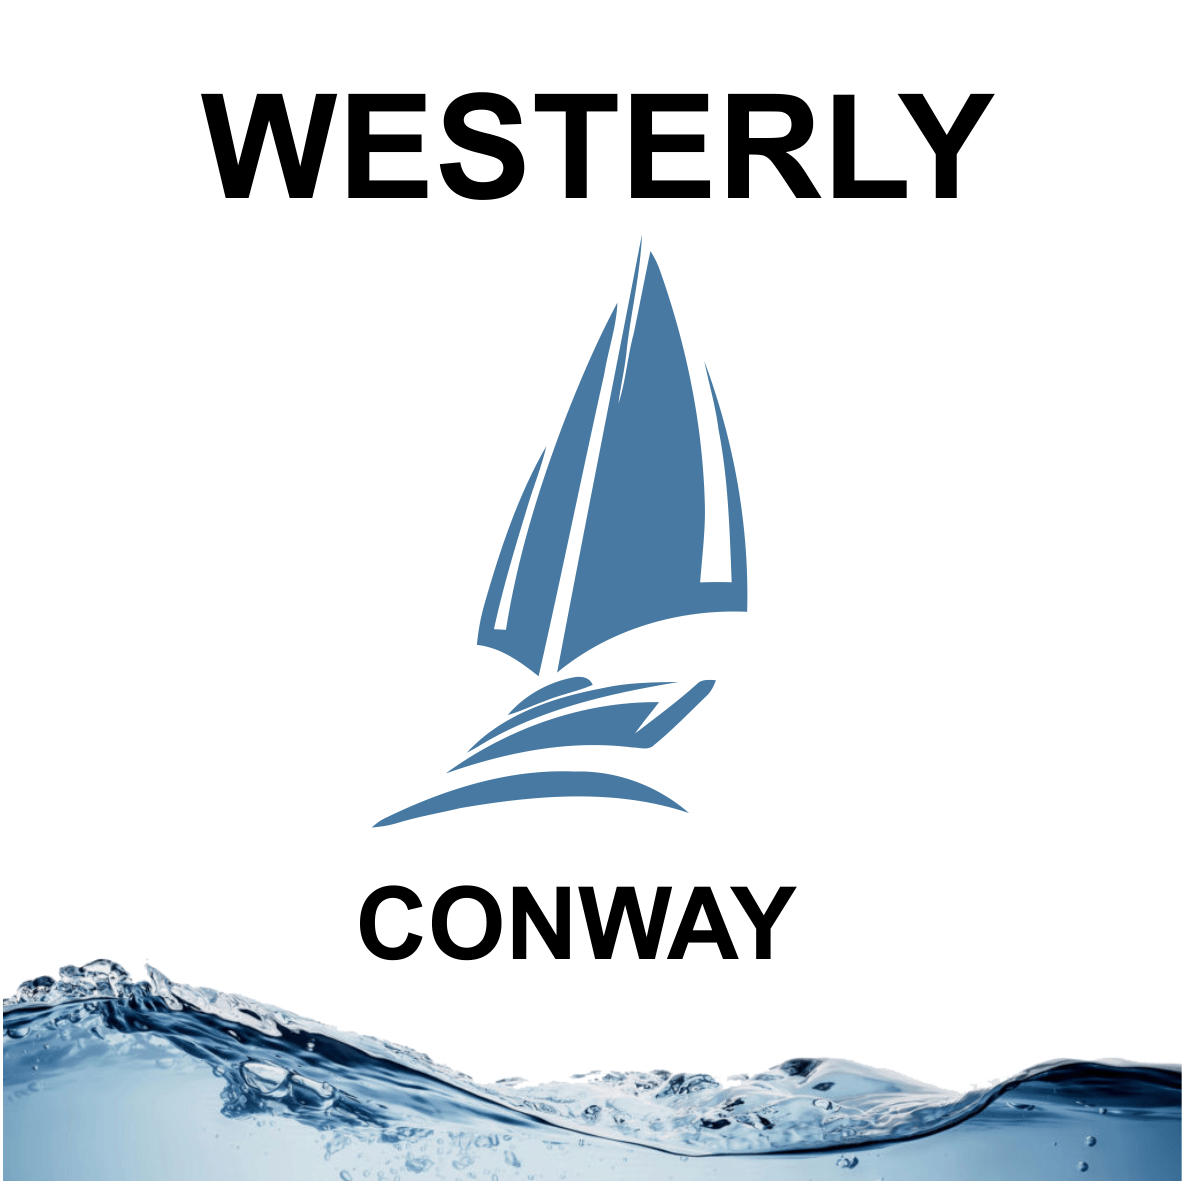 Westerly Conway